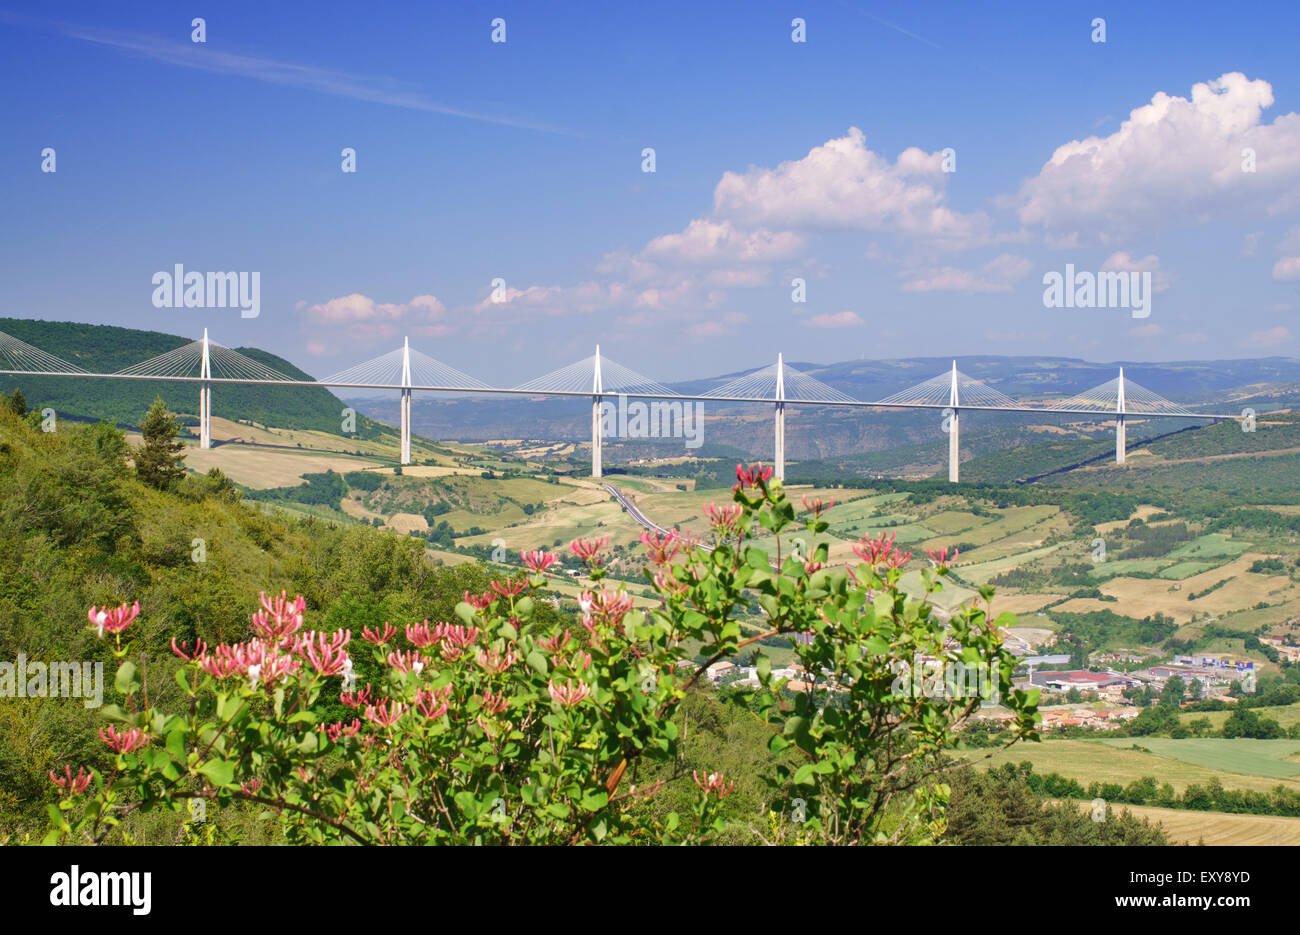 The Millau viaduct with wild honeysuckle in the foreground, Averyon,  Midi-Pyrenees, France, Europe Stock Photo